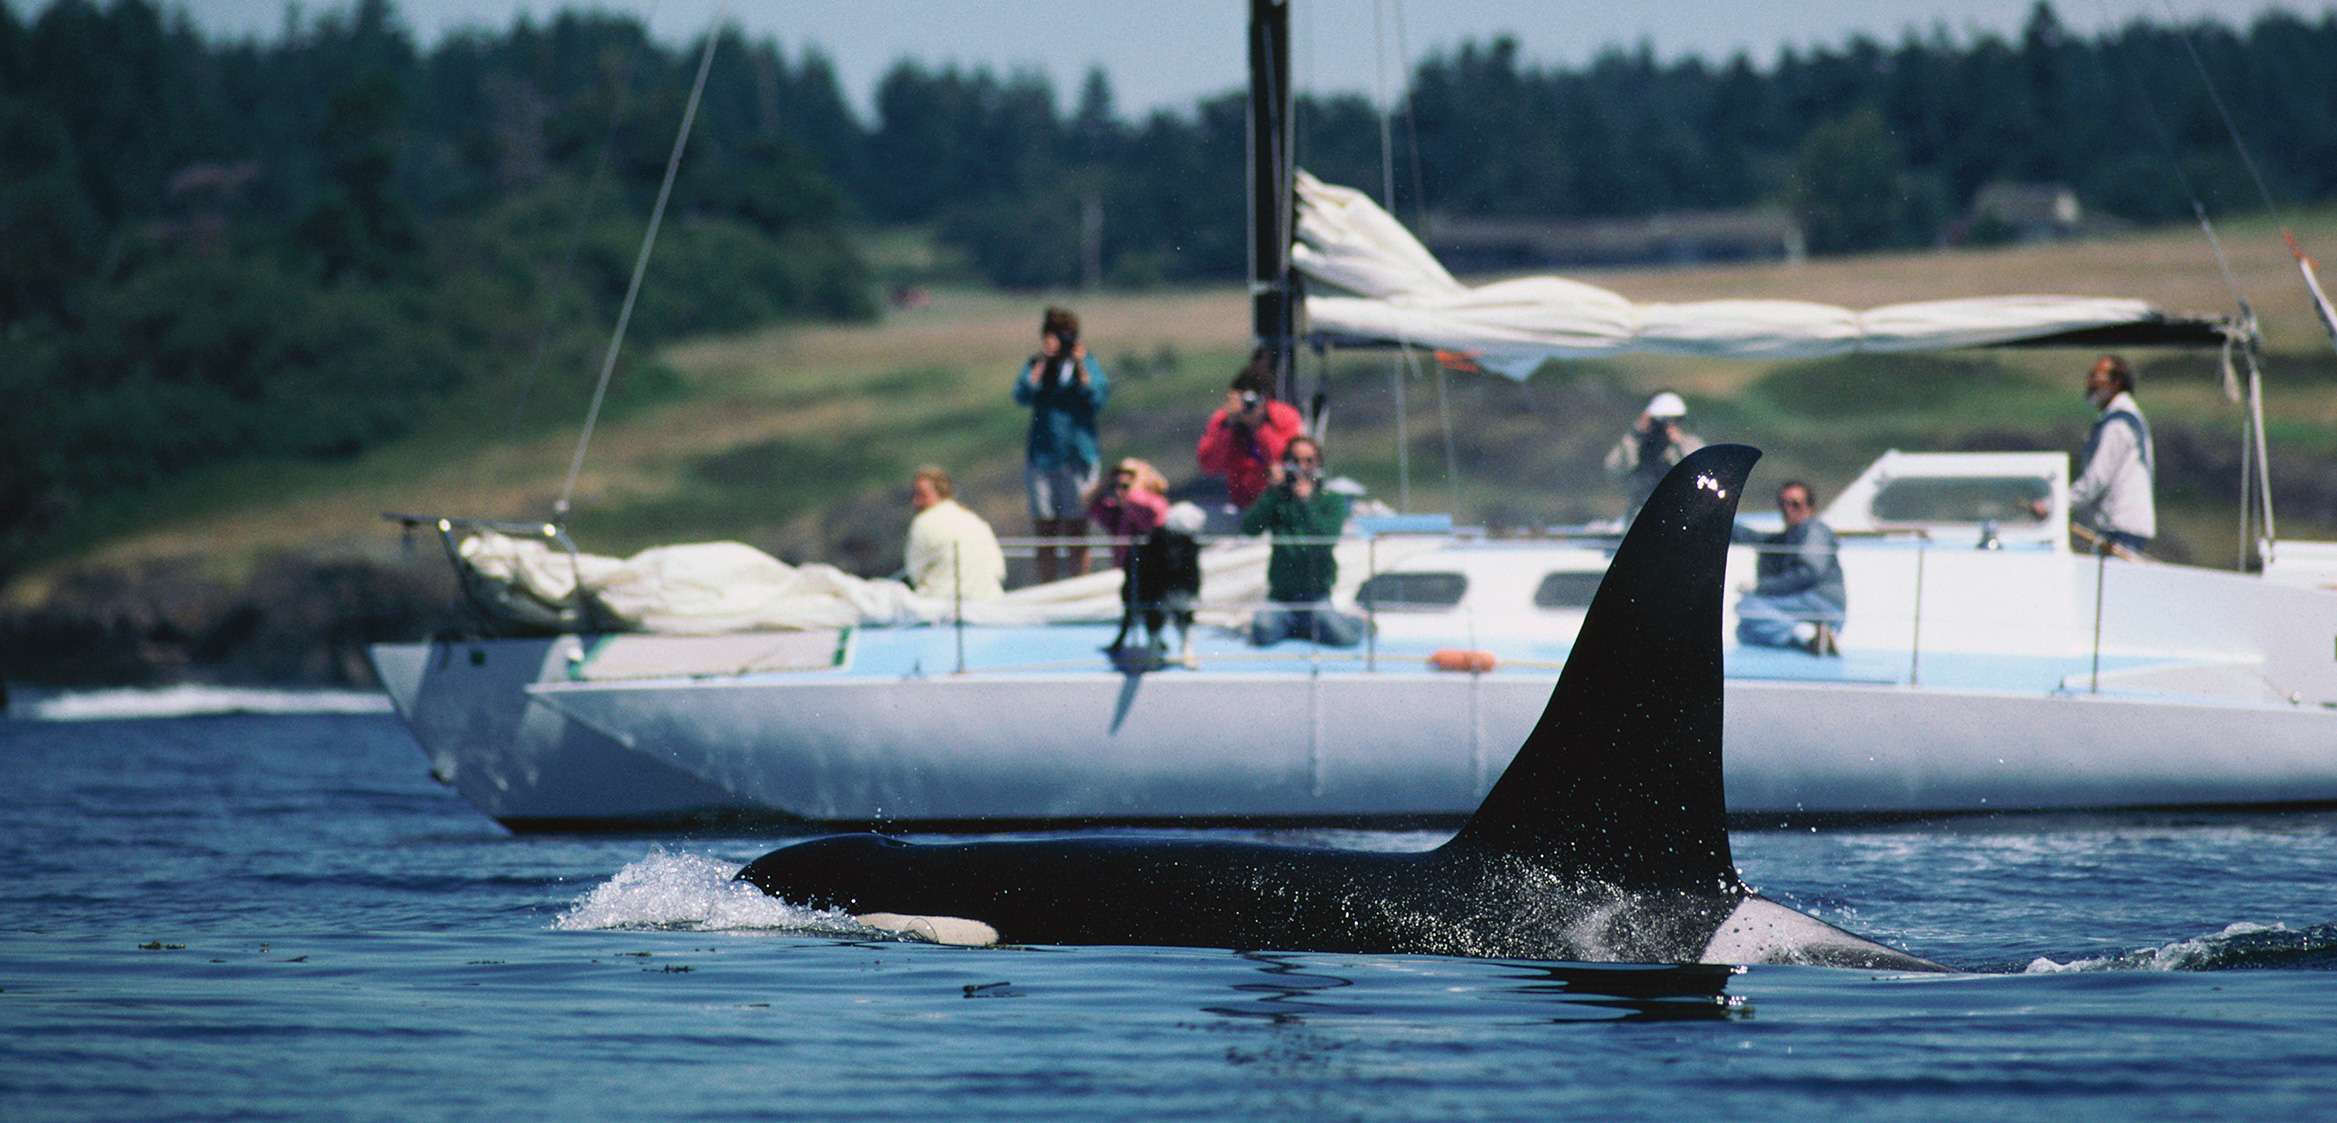 A resident killer whale swims in the waters off Washington State. Photo by Hiroya Minakuchi/Minden Pictures/Corbis